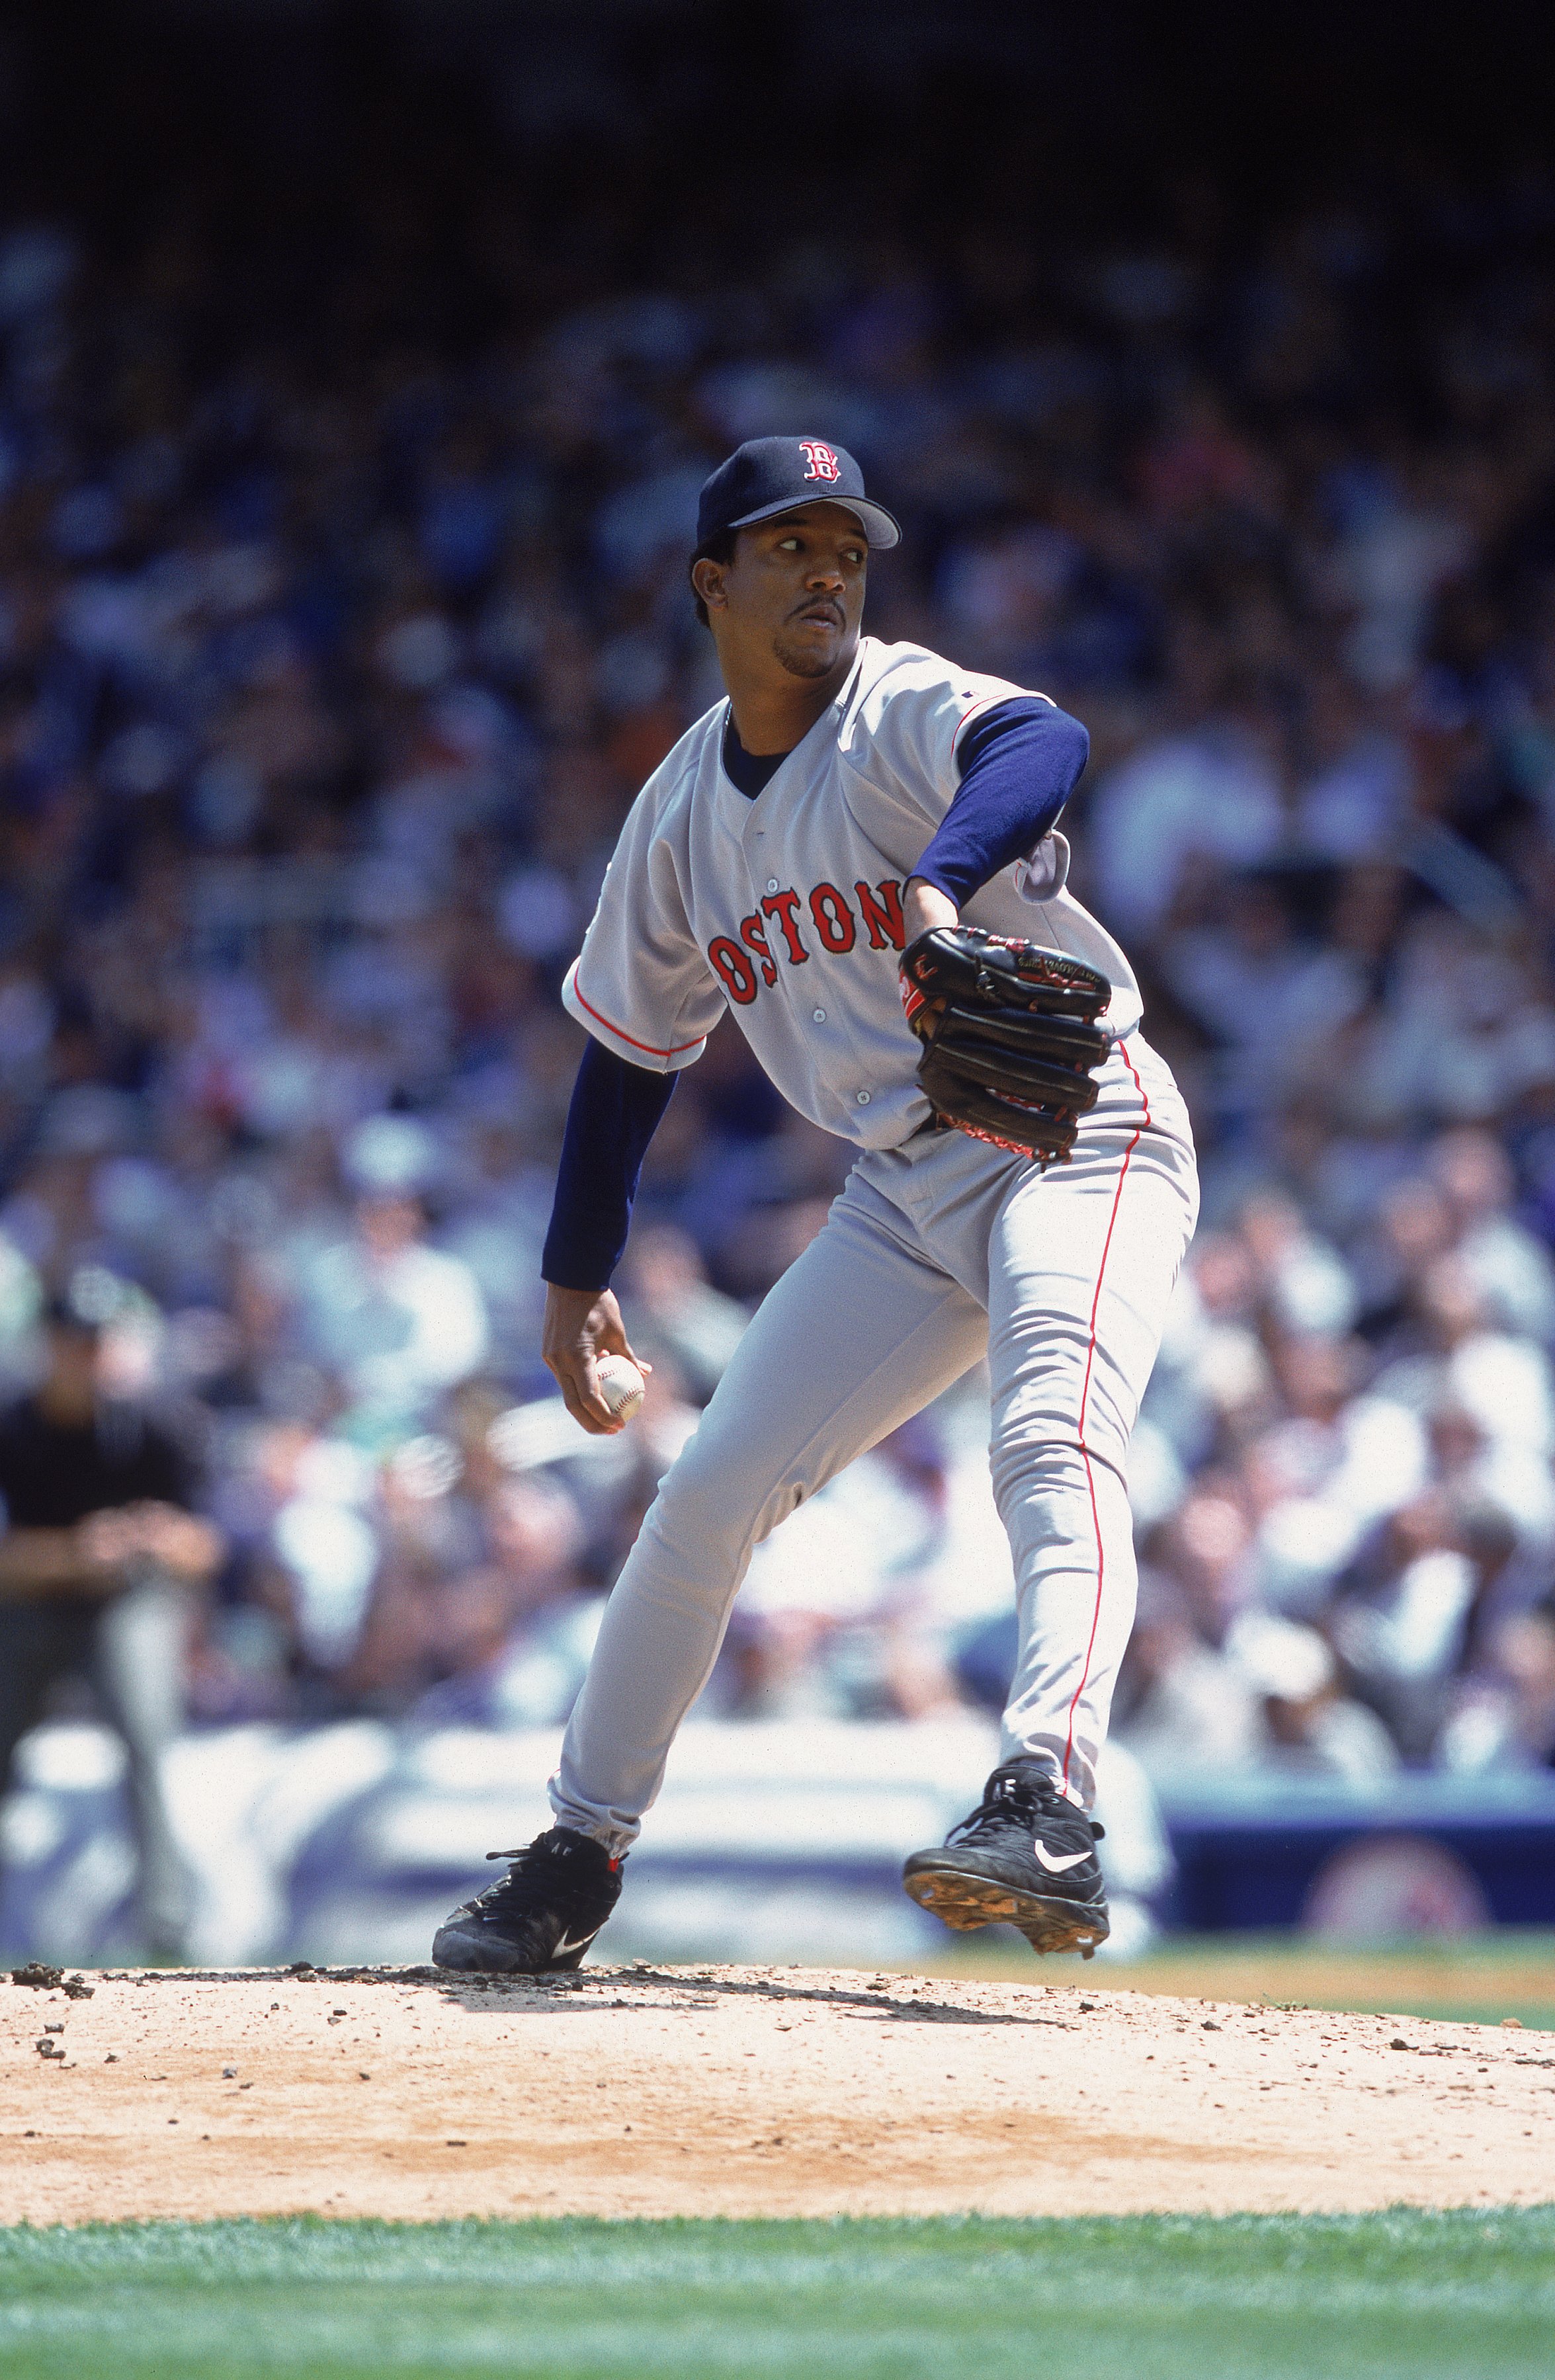 24 May 2001:  Pedro Martinez #45 of the Boston Red Sox pitches during the game against the New York Yankees at Yankee Stadium in the Bronx, New York. The Yankees defeated the Red Sox 2-1.Mandatory Credit: Rick Berk  /Allsport